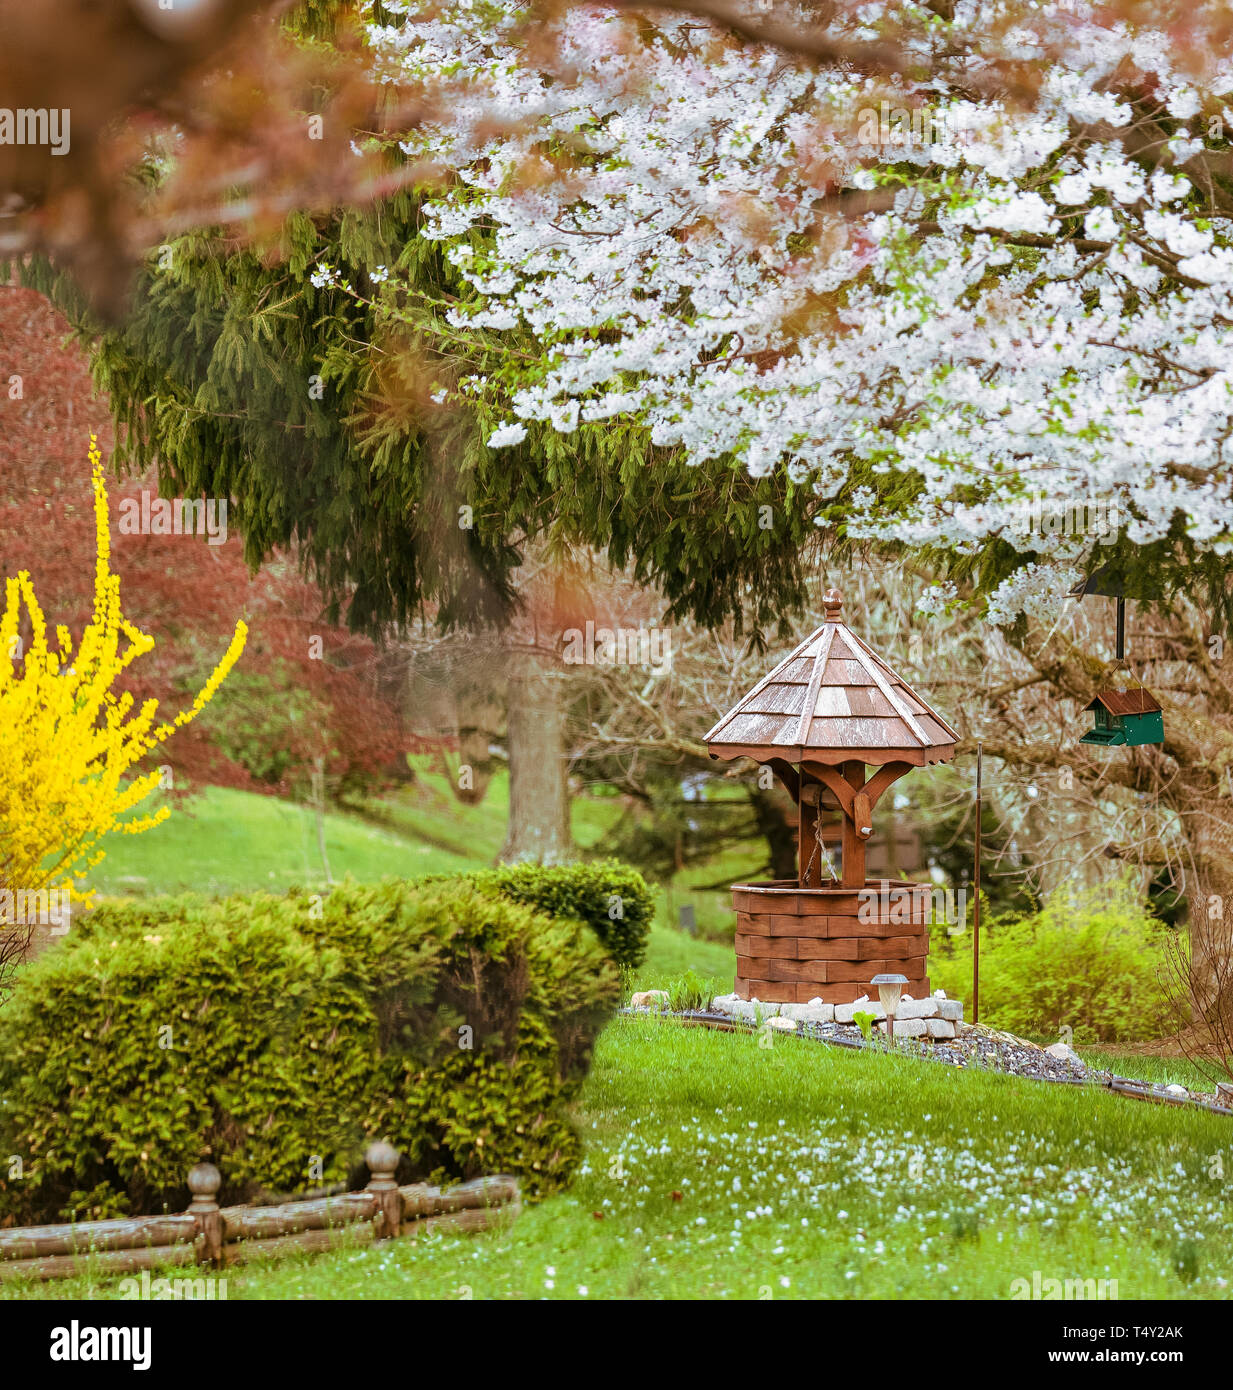 Garden With A Well Located At A Home Stock Photo